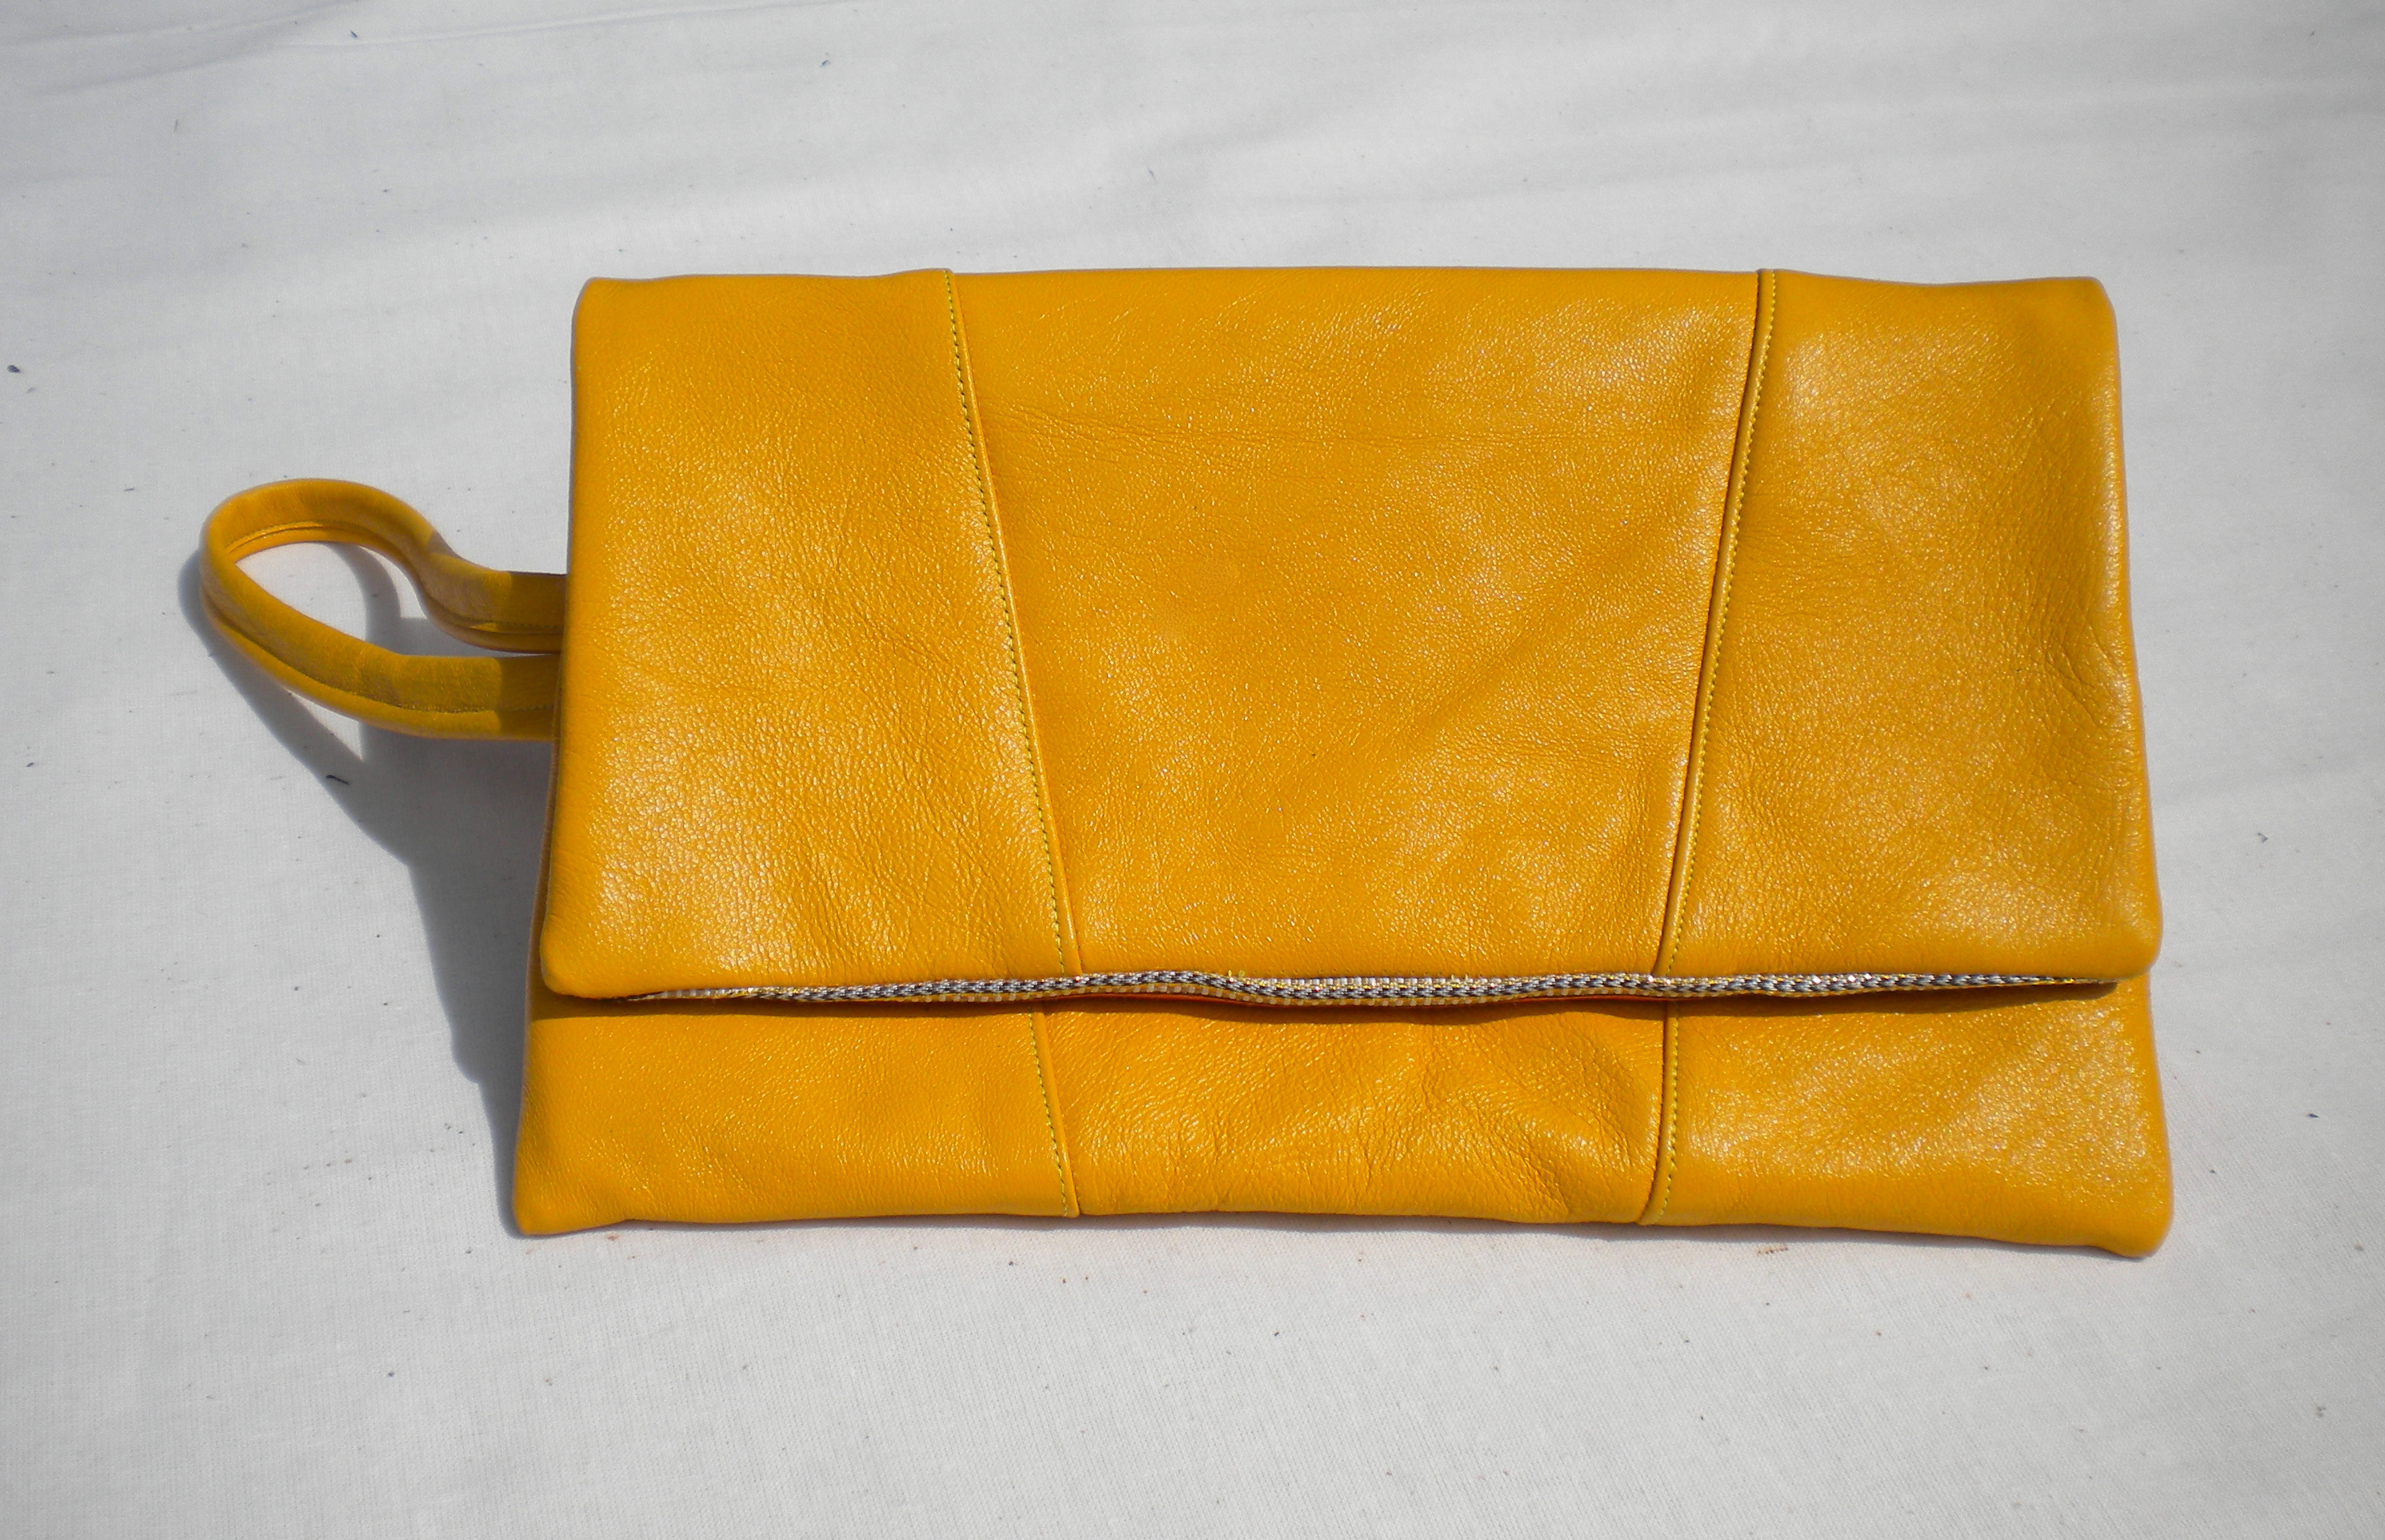  Yellow leather clutch